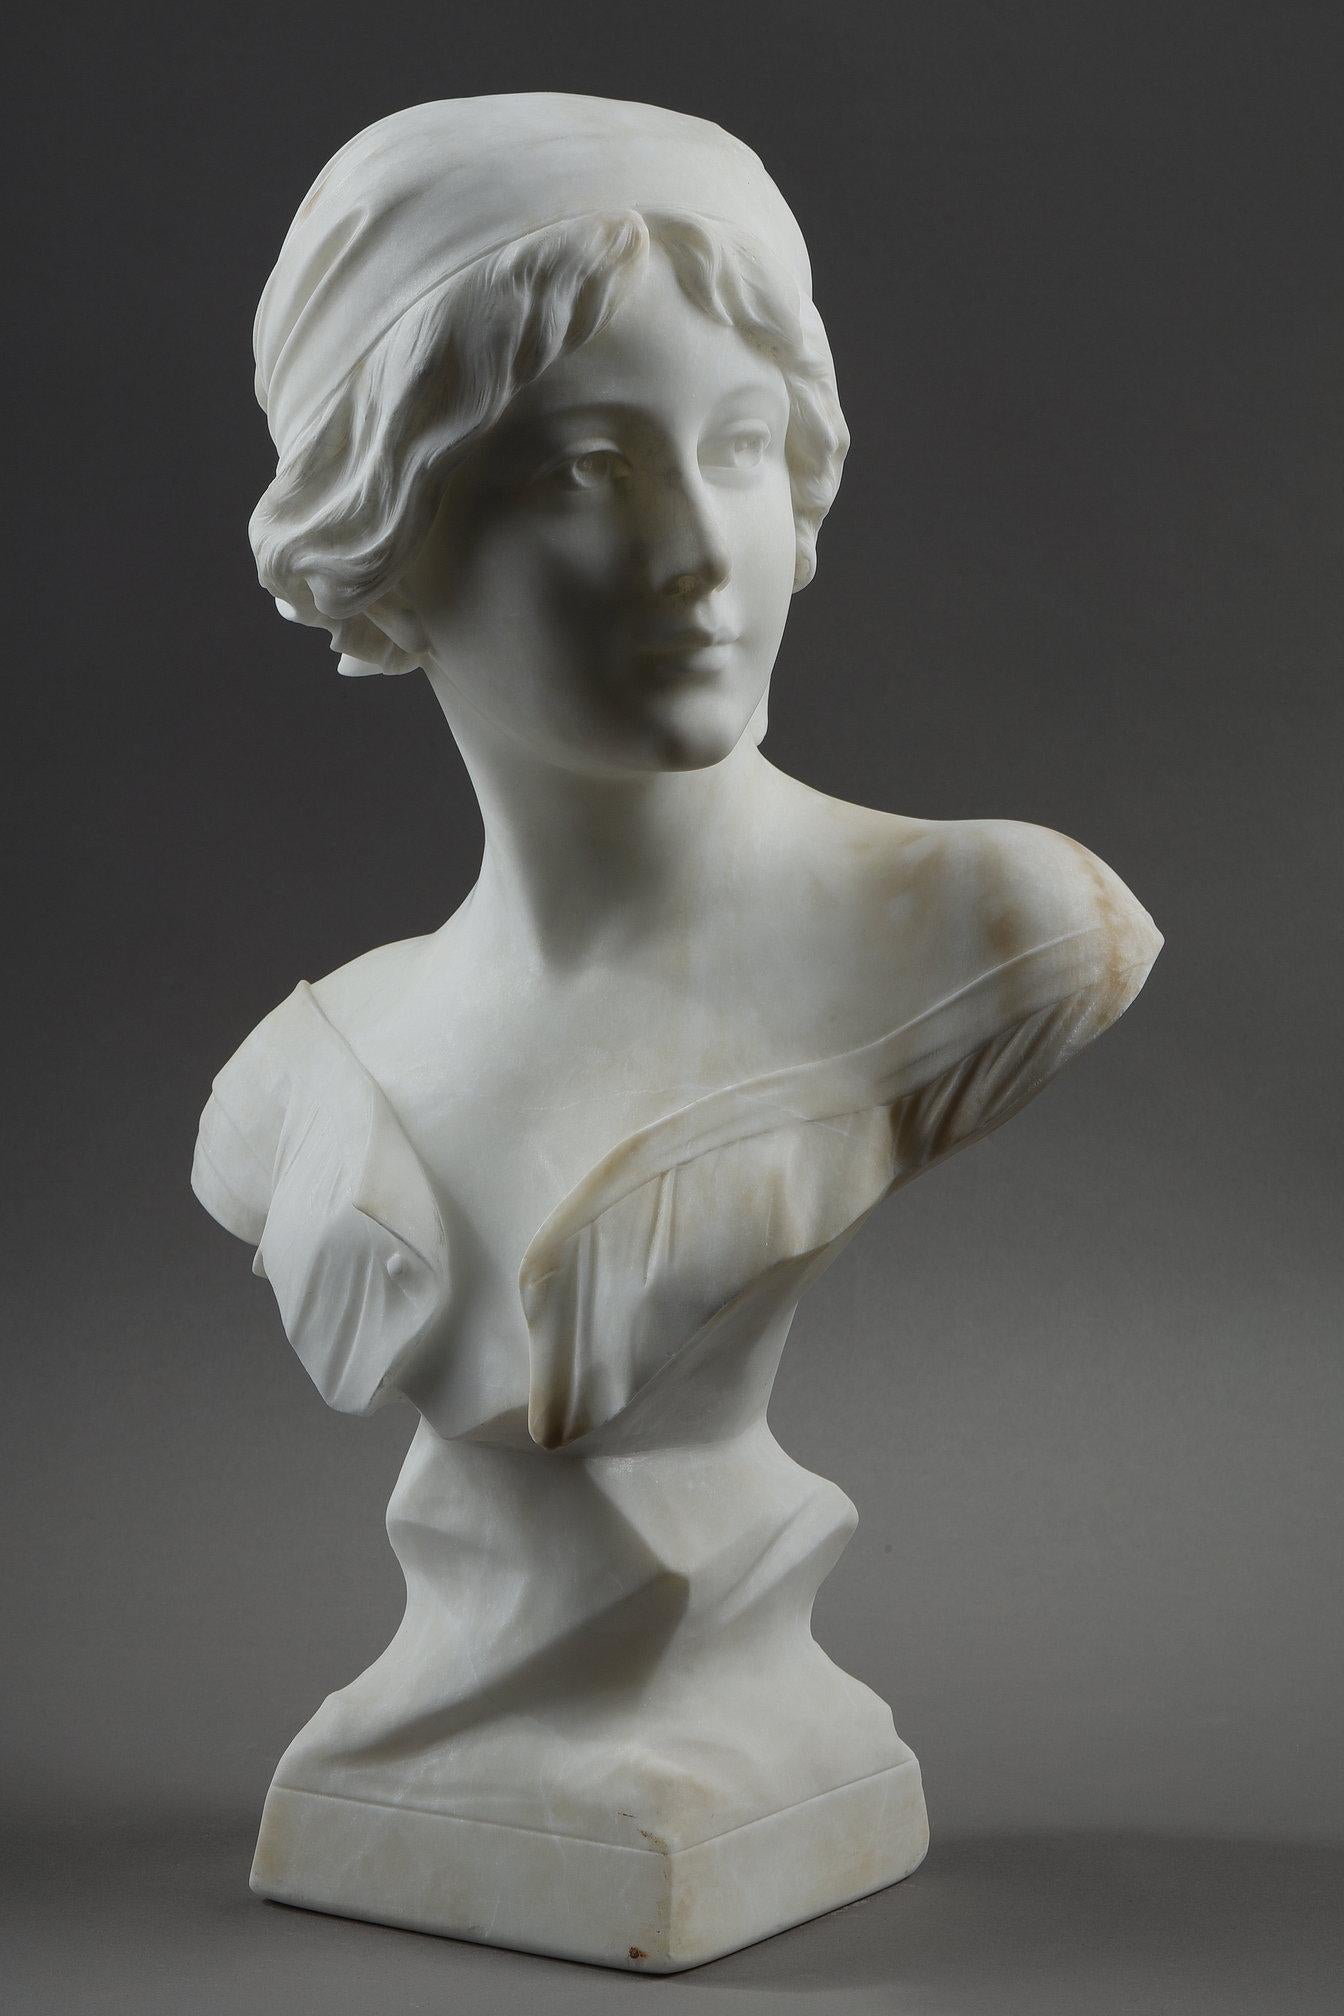 Alabaster sculpture of a bust of a young woman with her hair held in a kerchief. Signed on the back: A. Cyprien.

